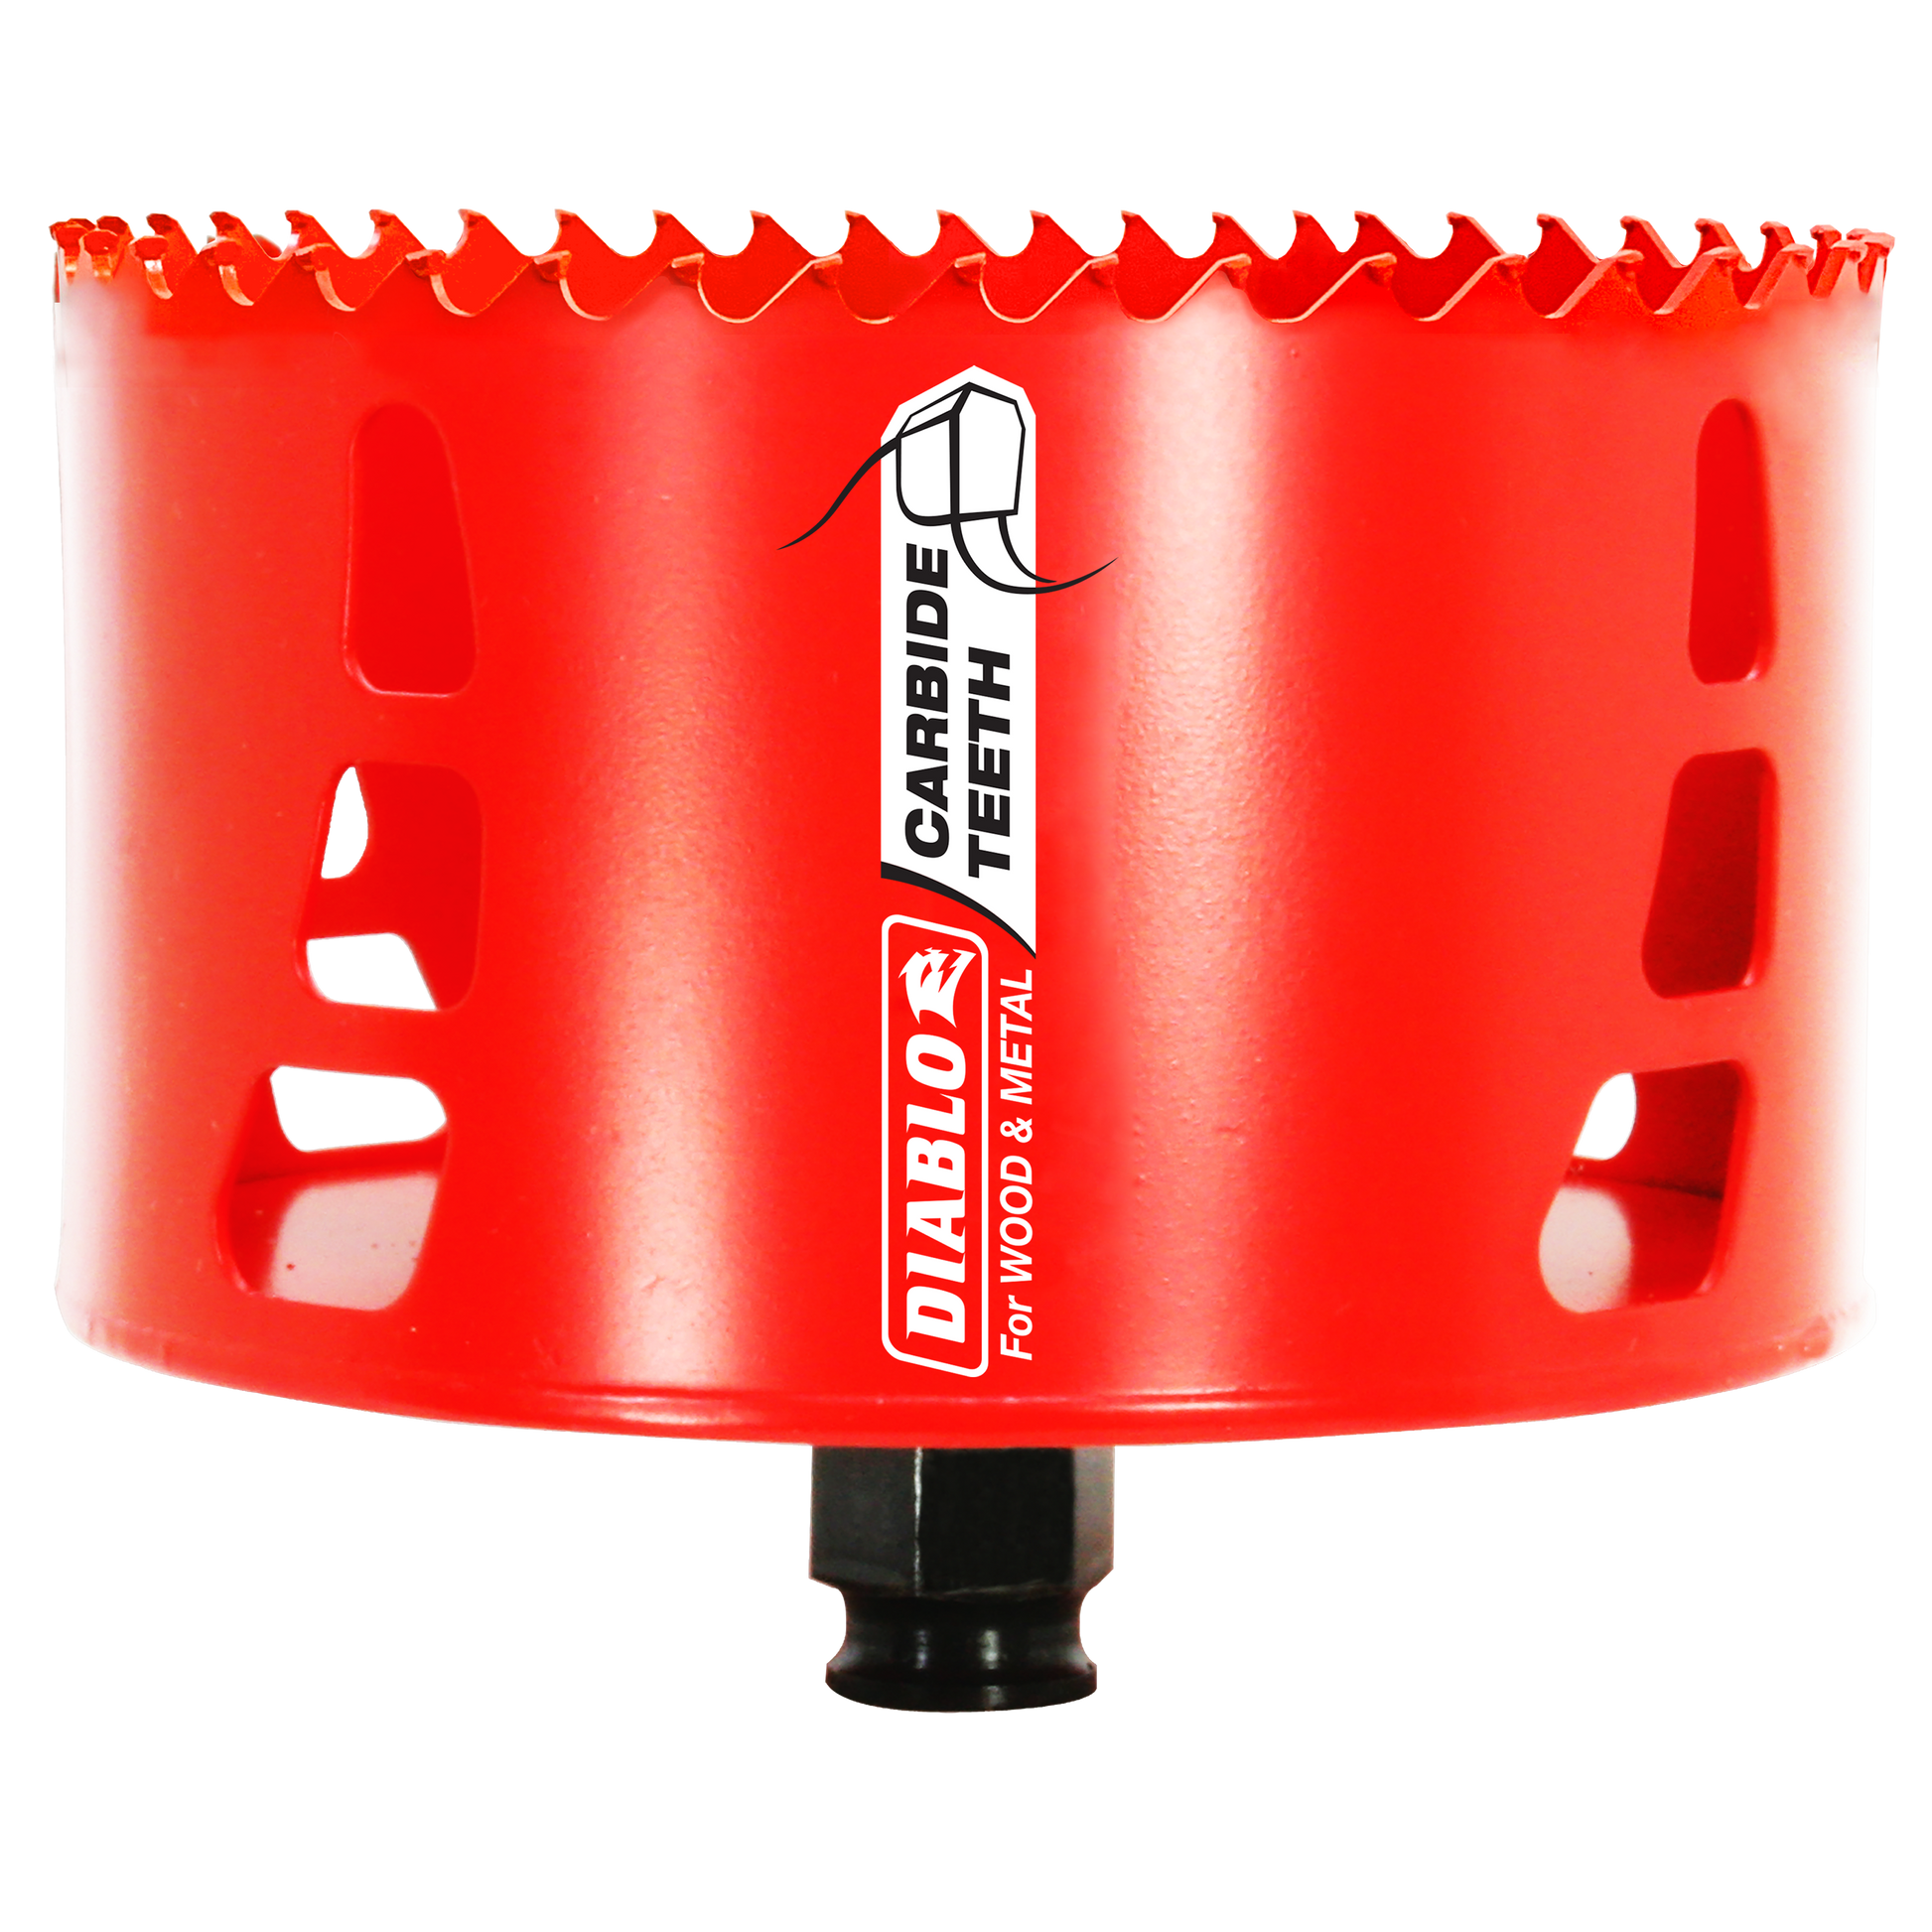 4-1/2 in. (114mm) Carbide-Tipped Wood & Metal Holesaw